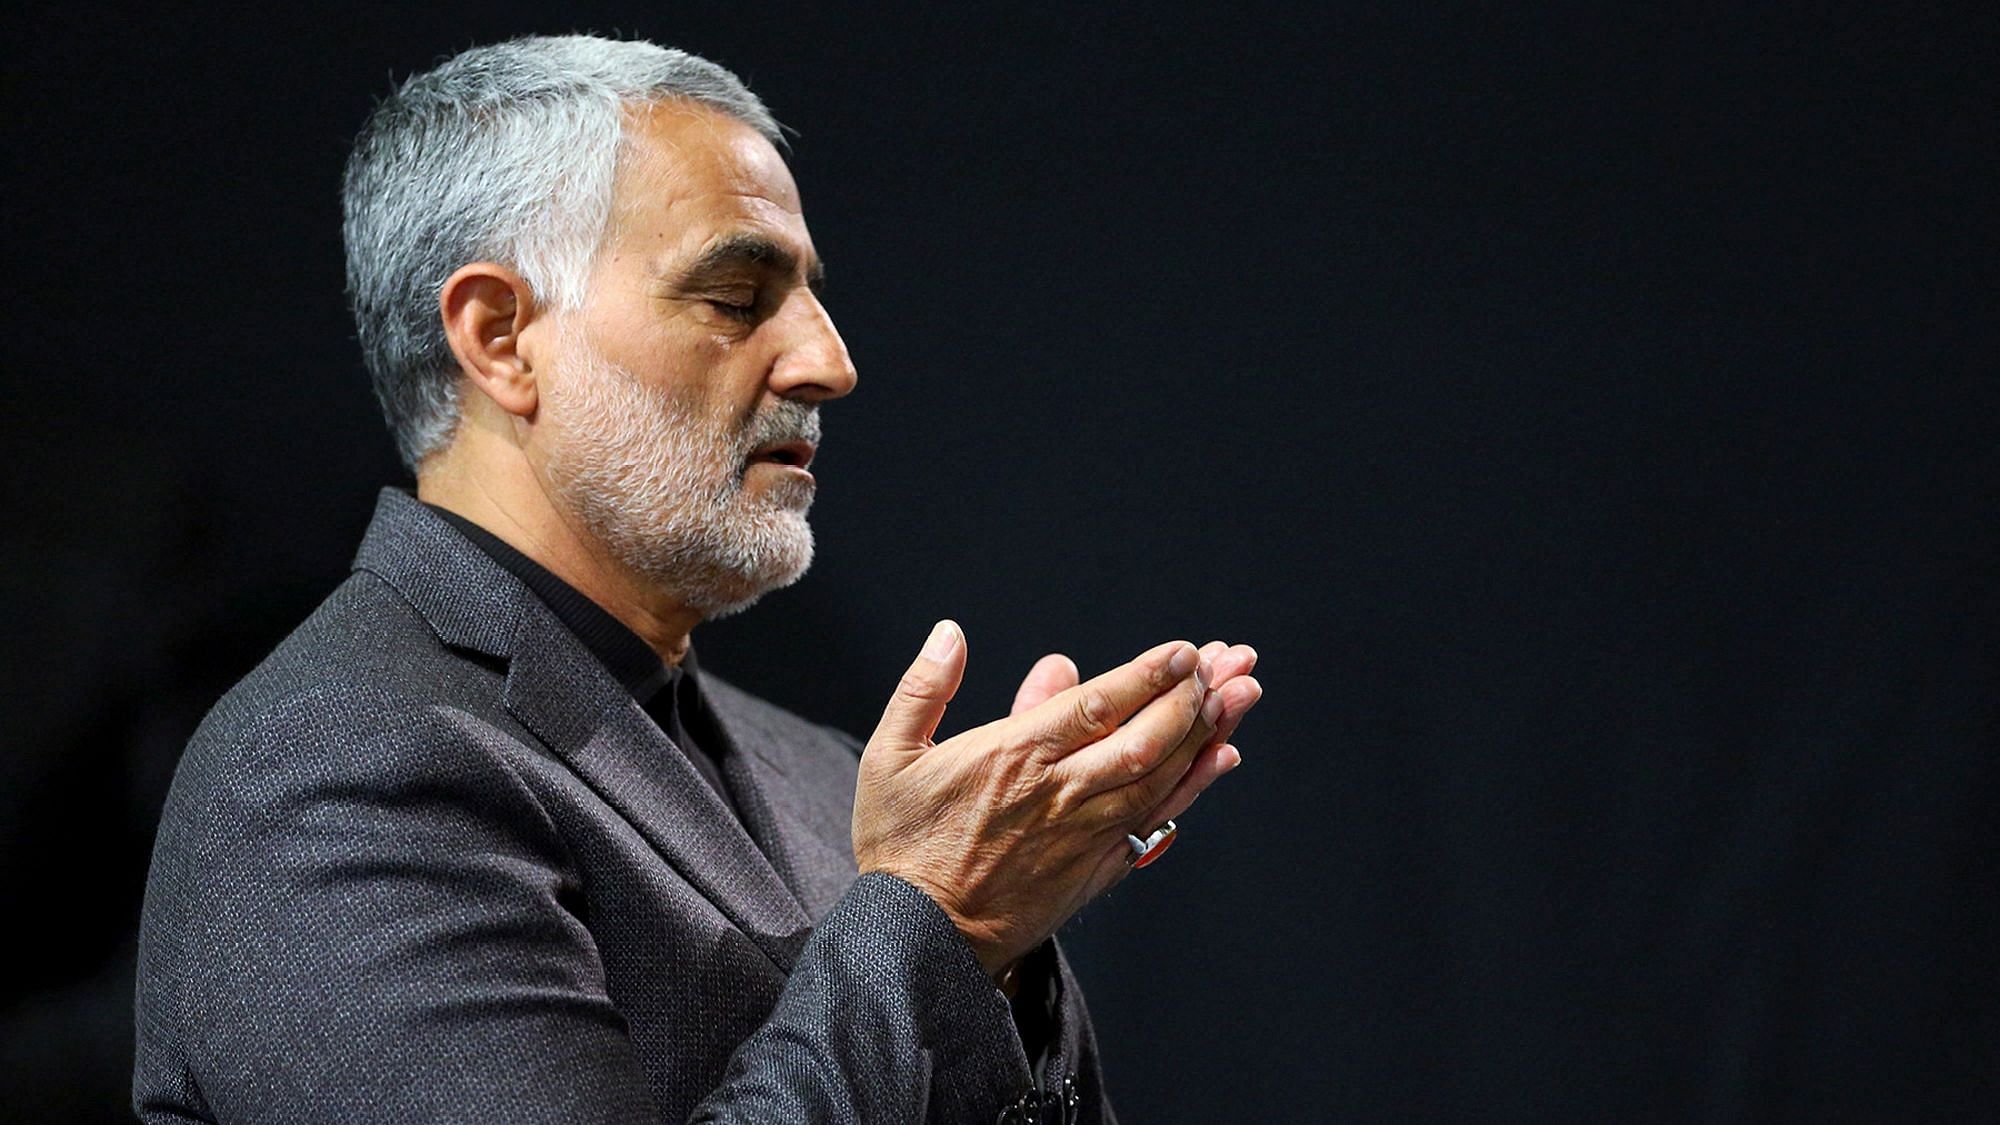 General Soleimani, the head of Iran’s elite al-Quds force and architect of its regional security apparatus, was killed following a US airstrike at Baghdad’s international airport on Friday, 3 January.  